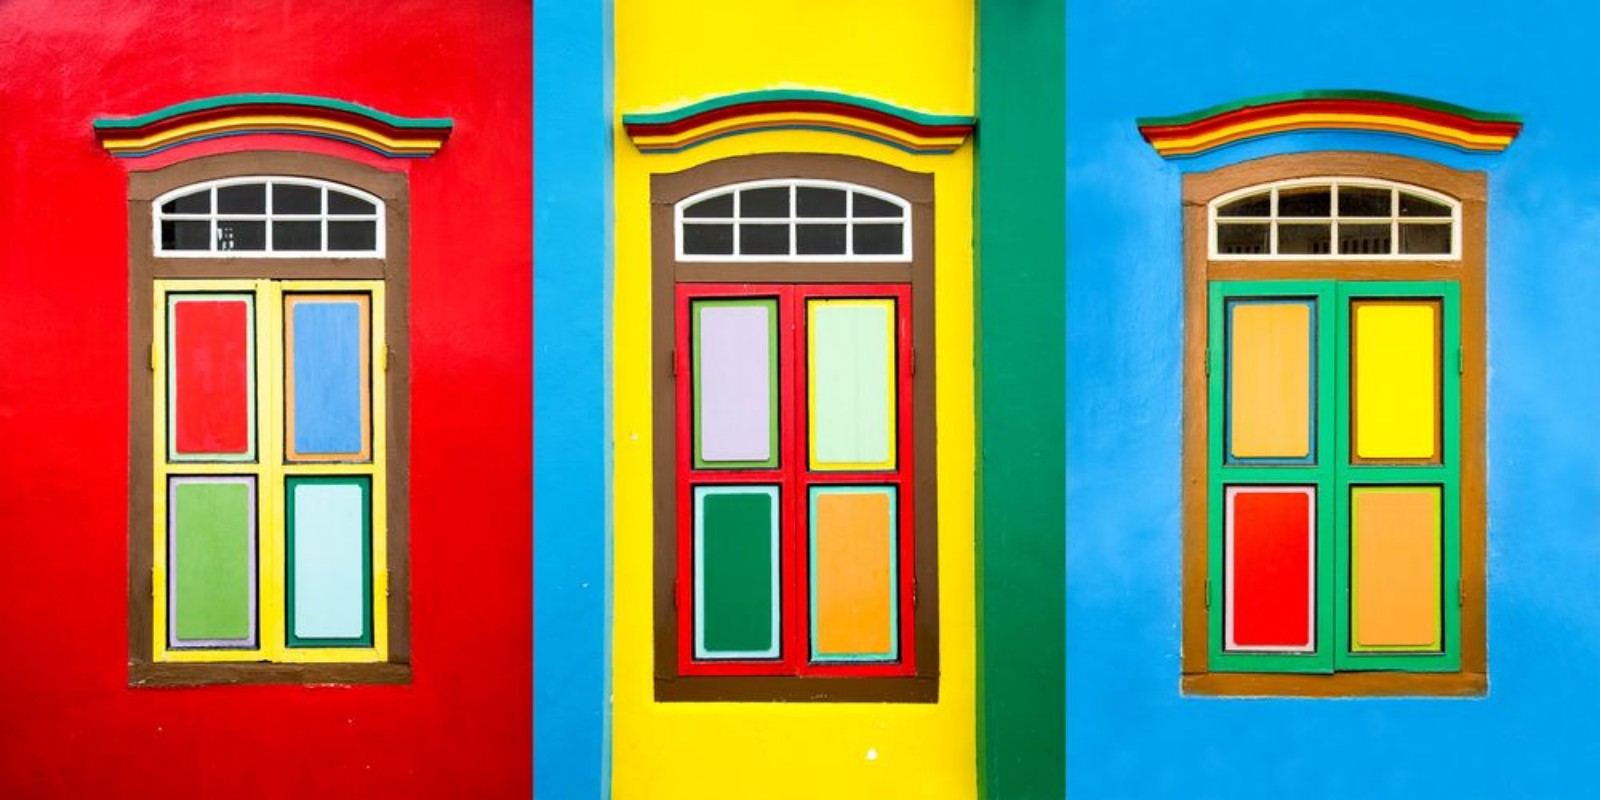 Image de Collage of 3 colorful windows on the facade of a house in Little India Singapore